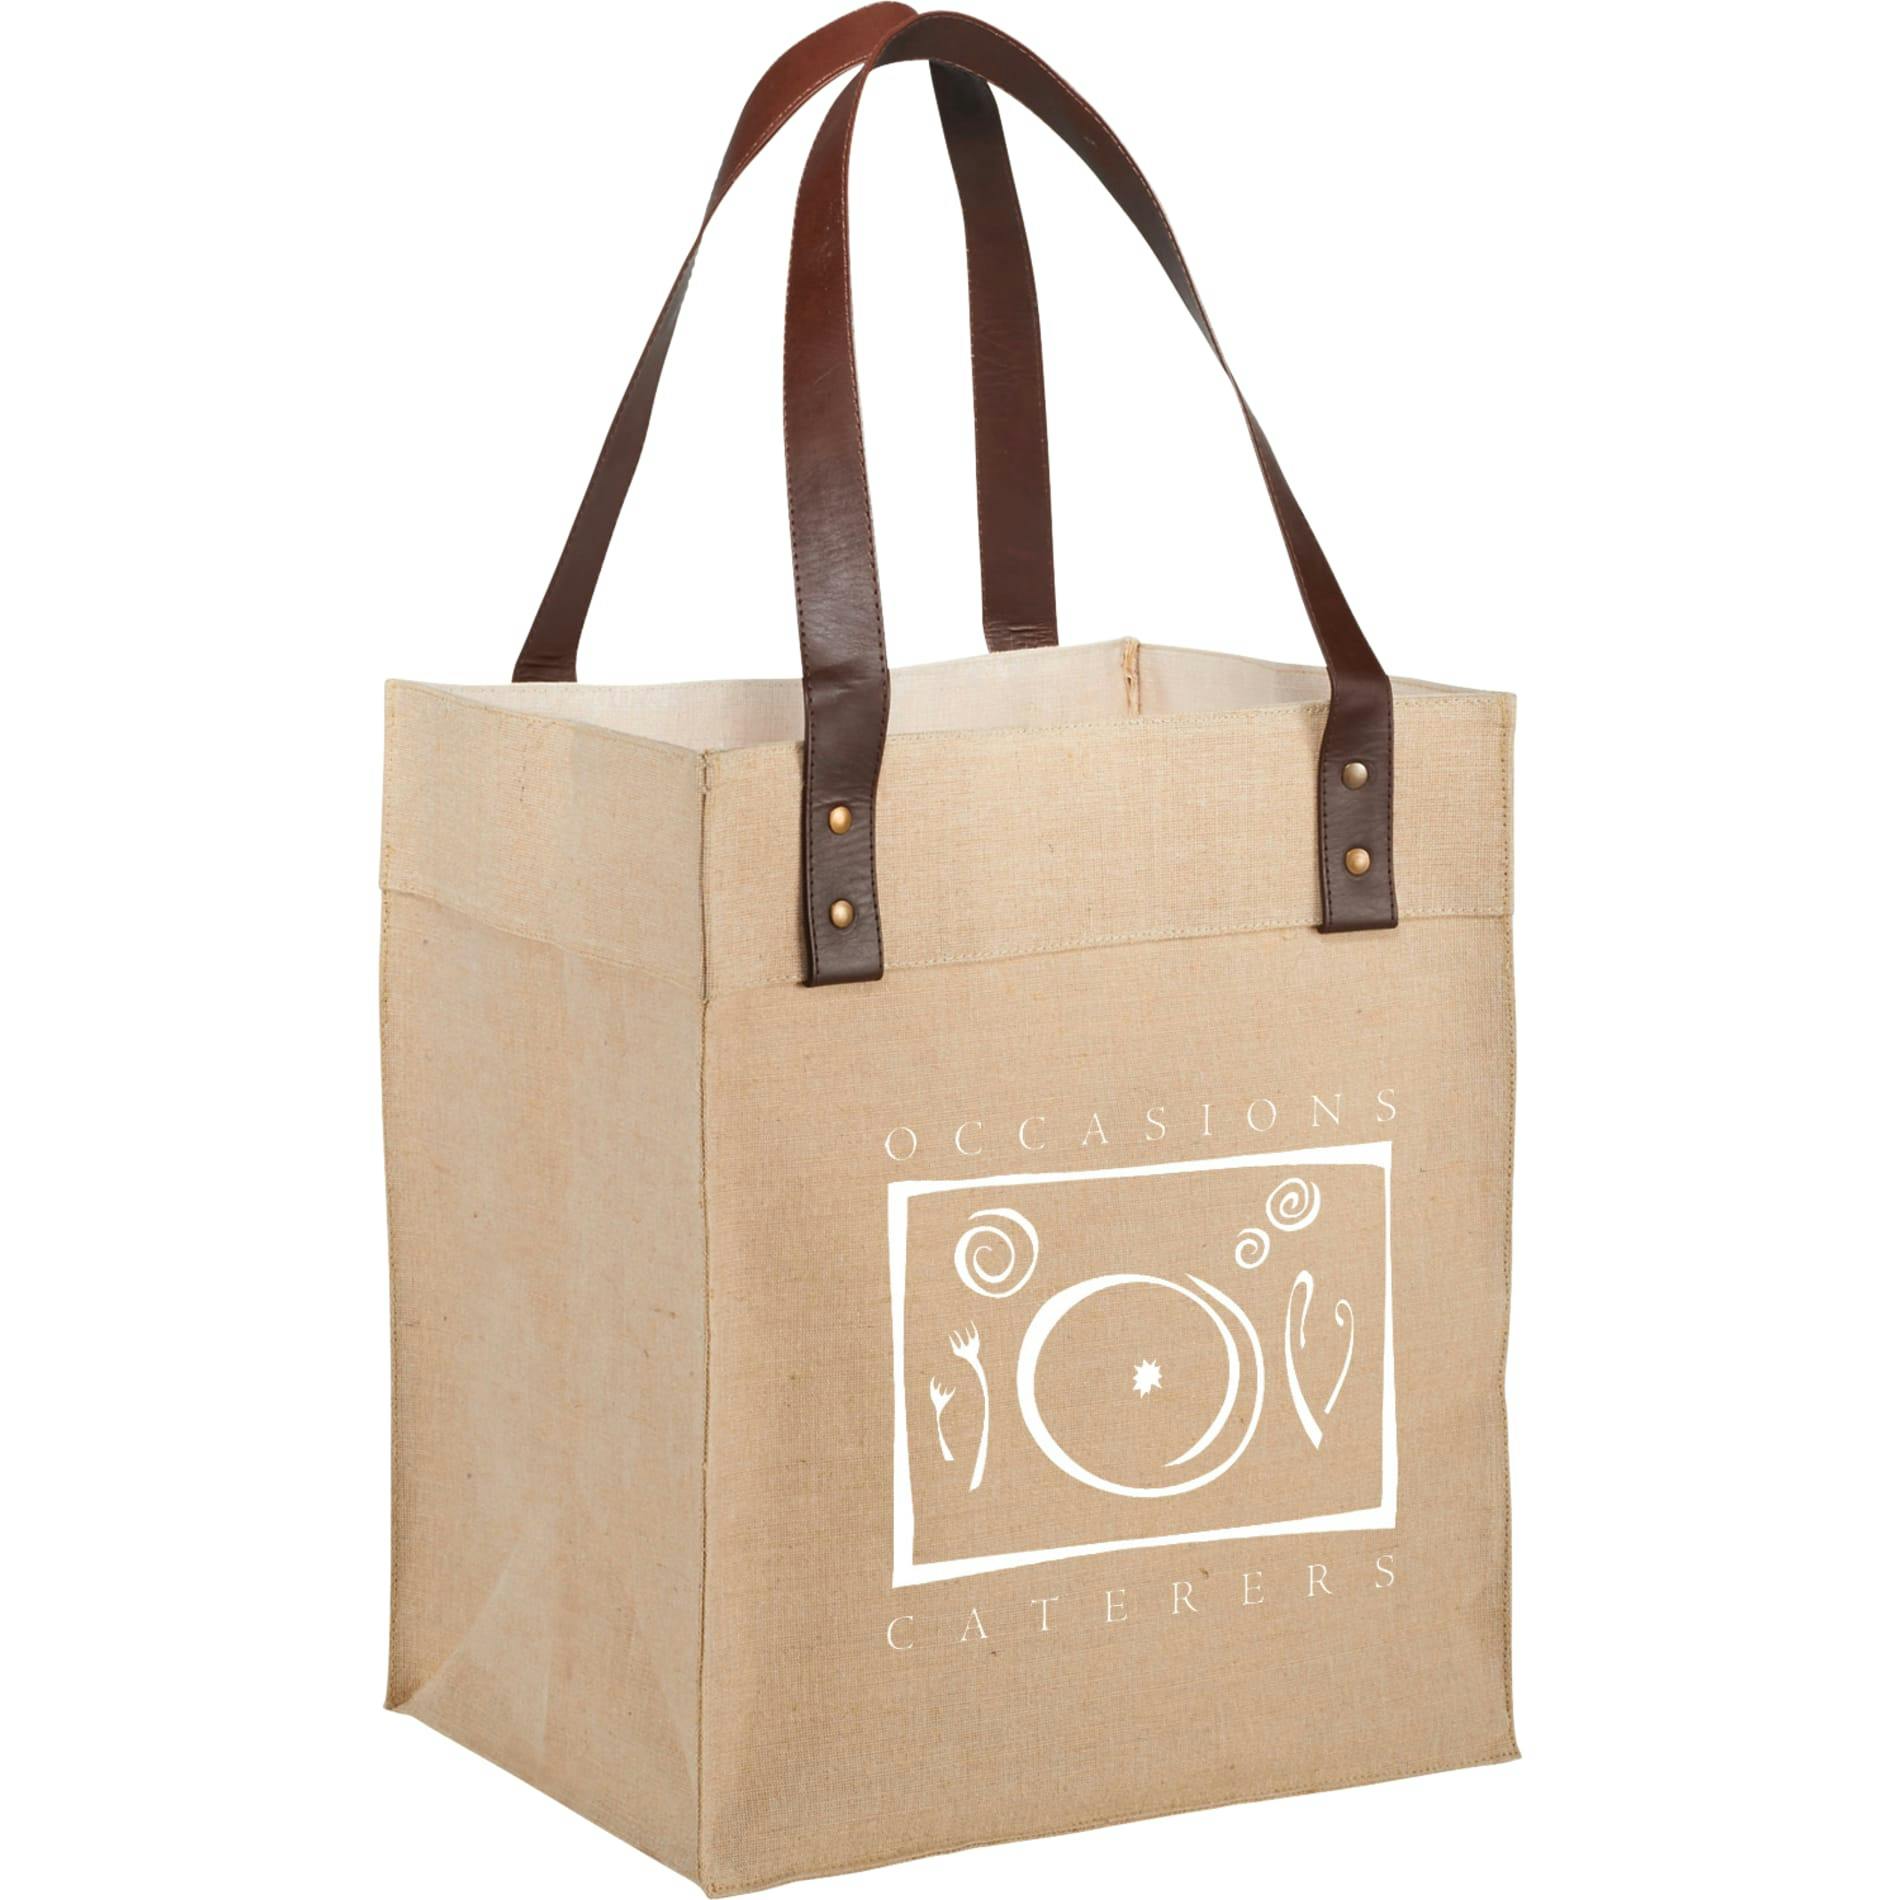 Westover Premium Grocery Tote - additional Image 4